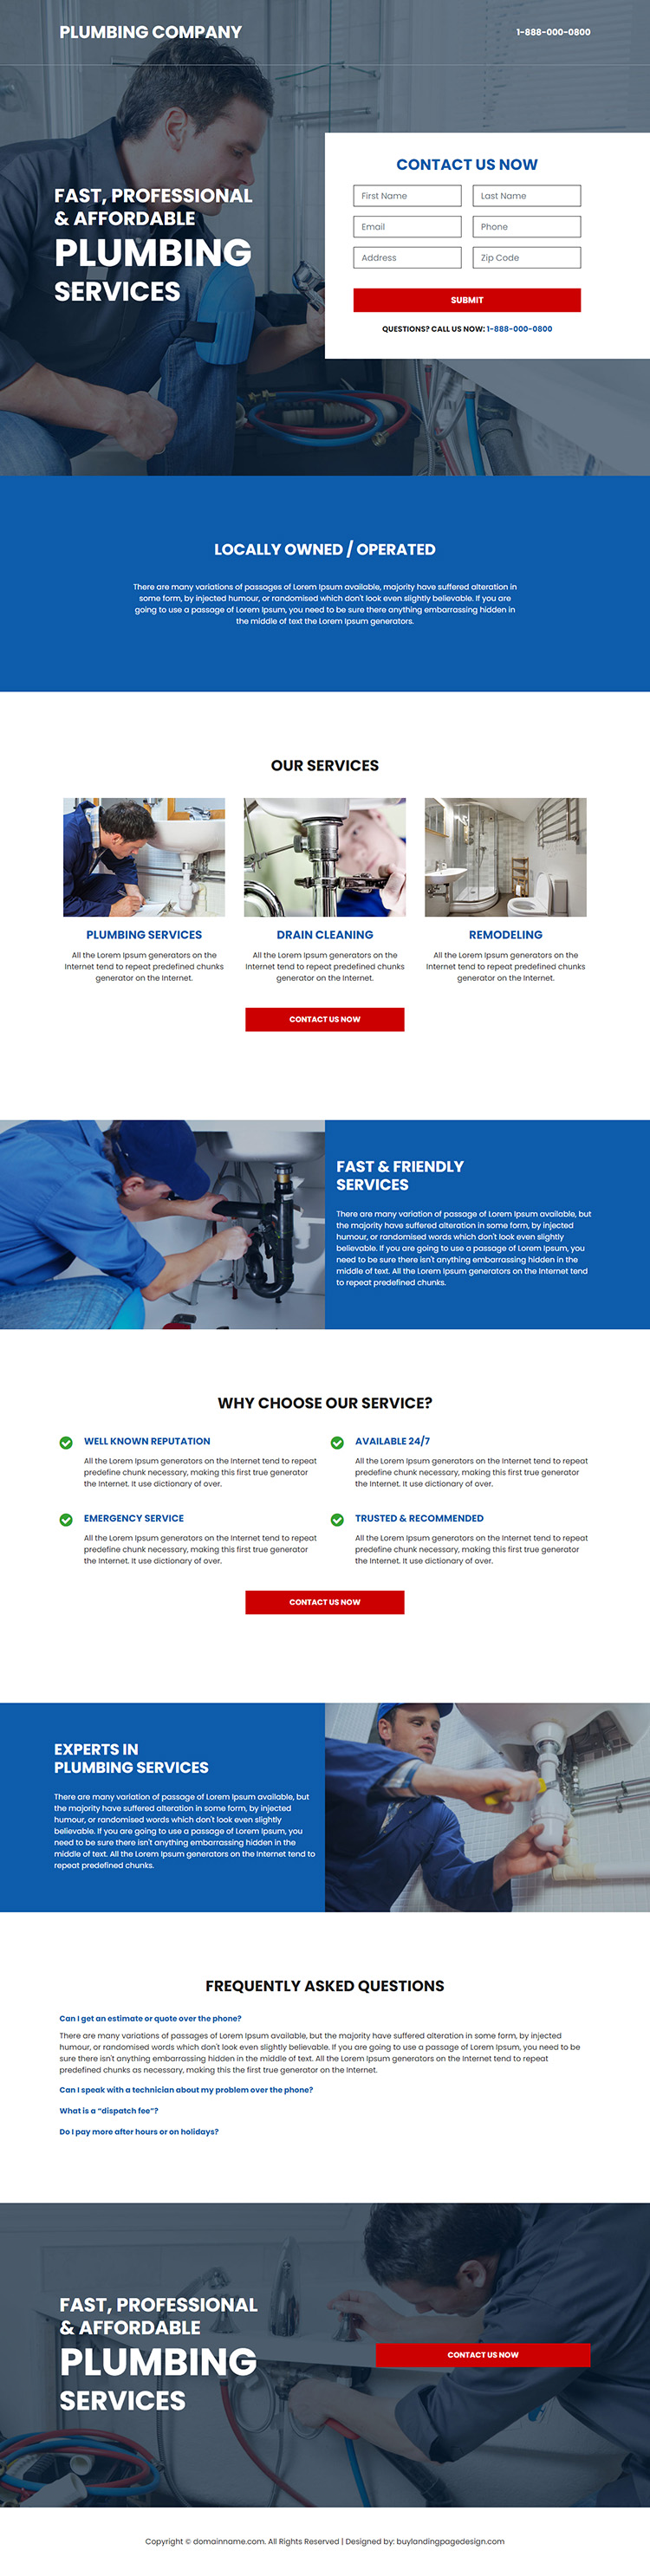 affordable plumbing service lead capture landing page